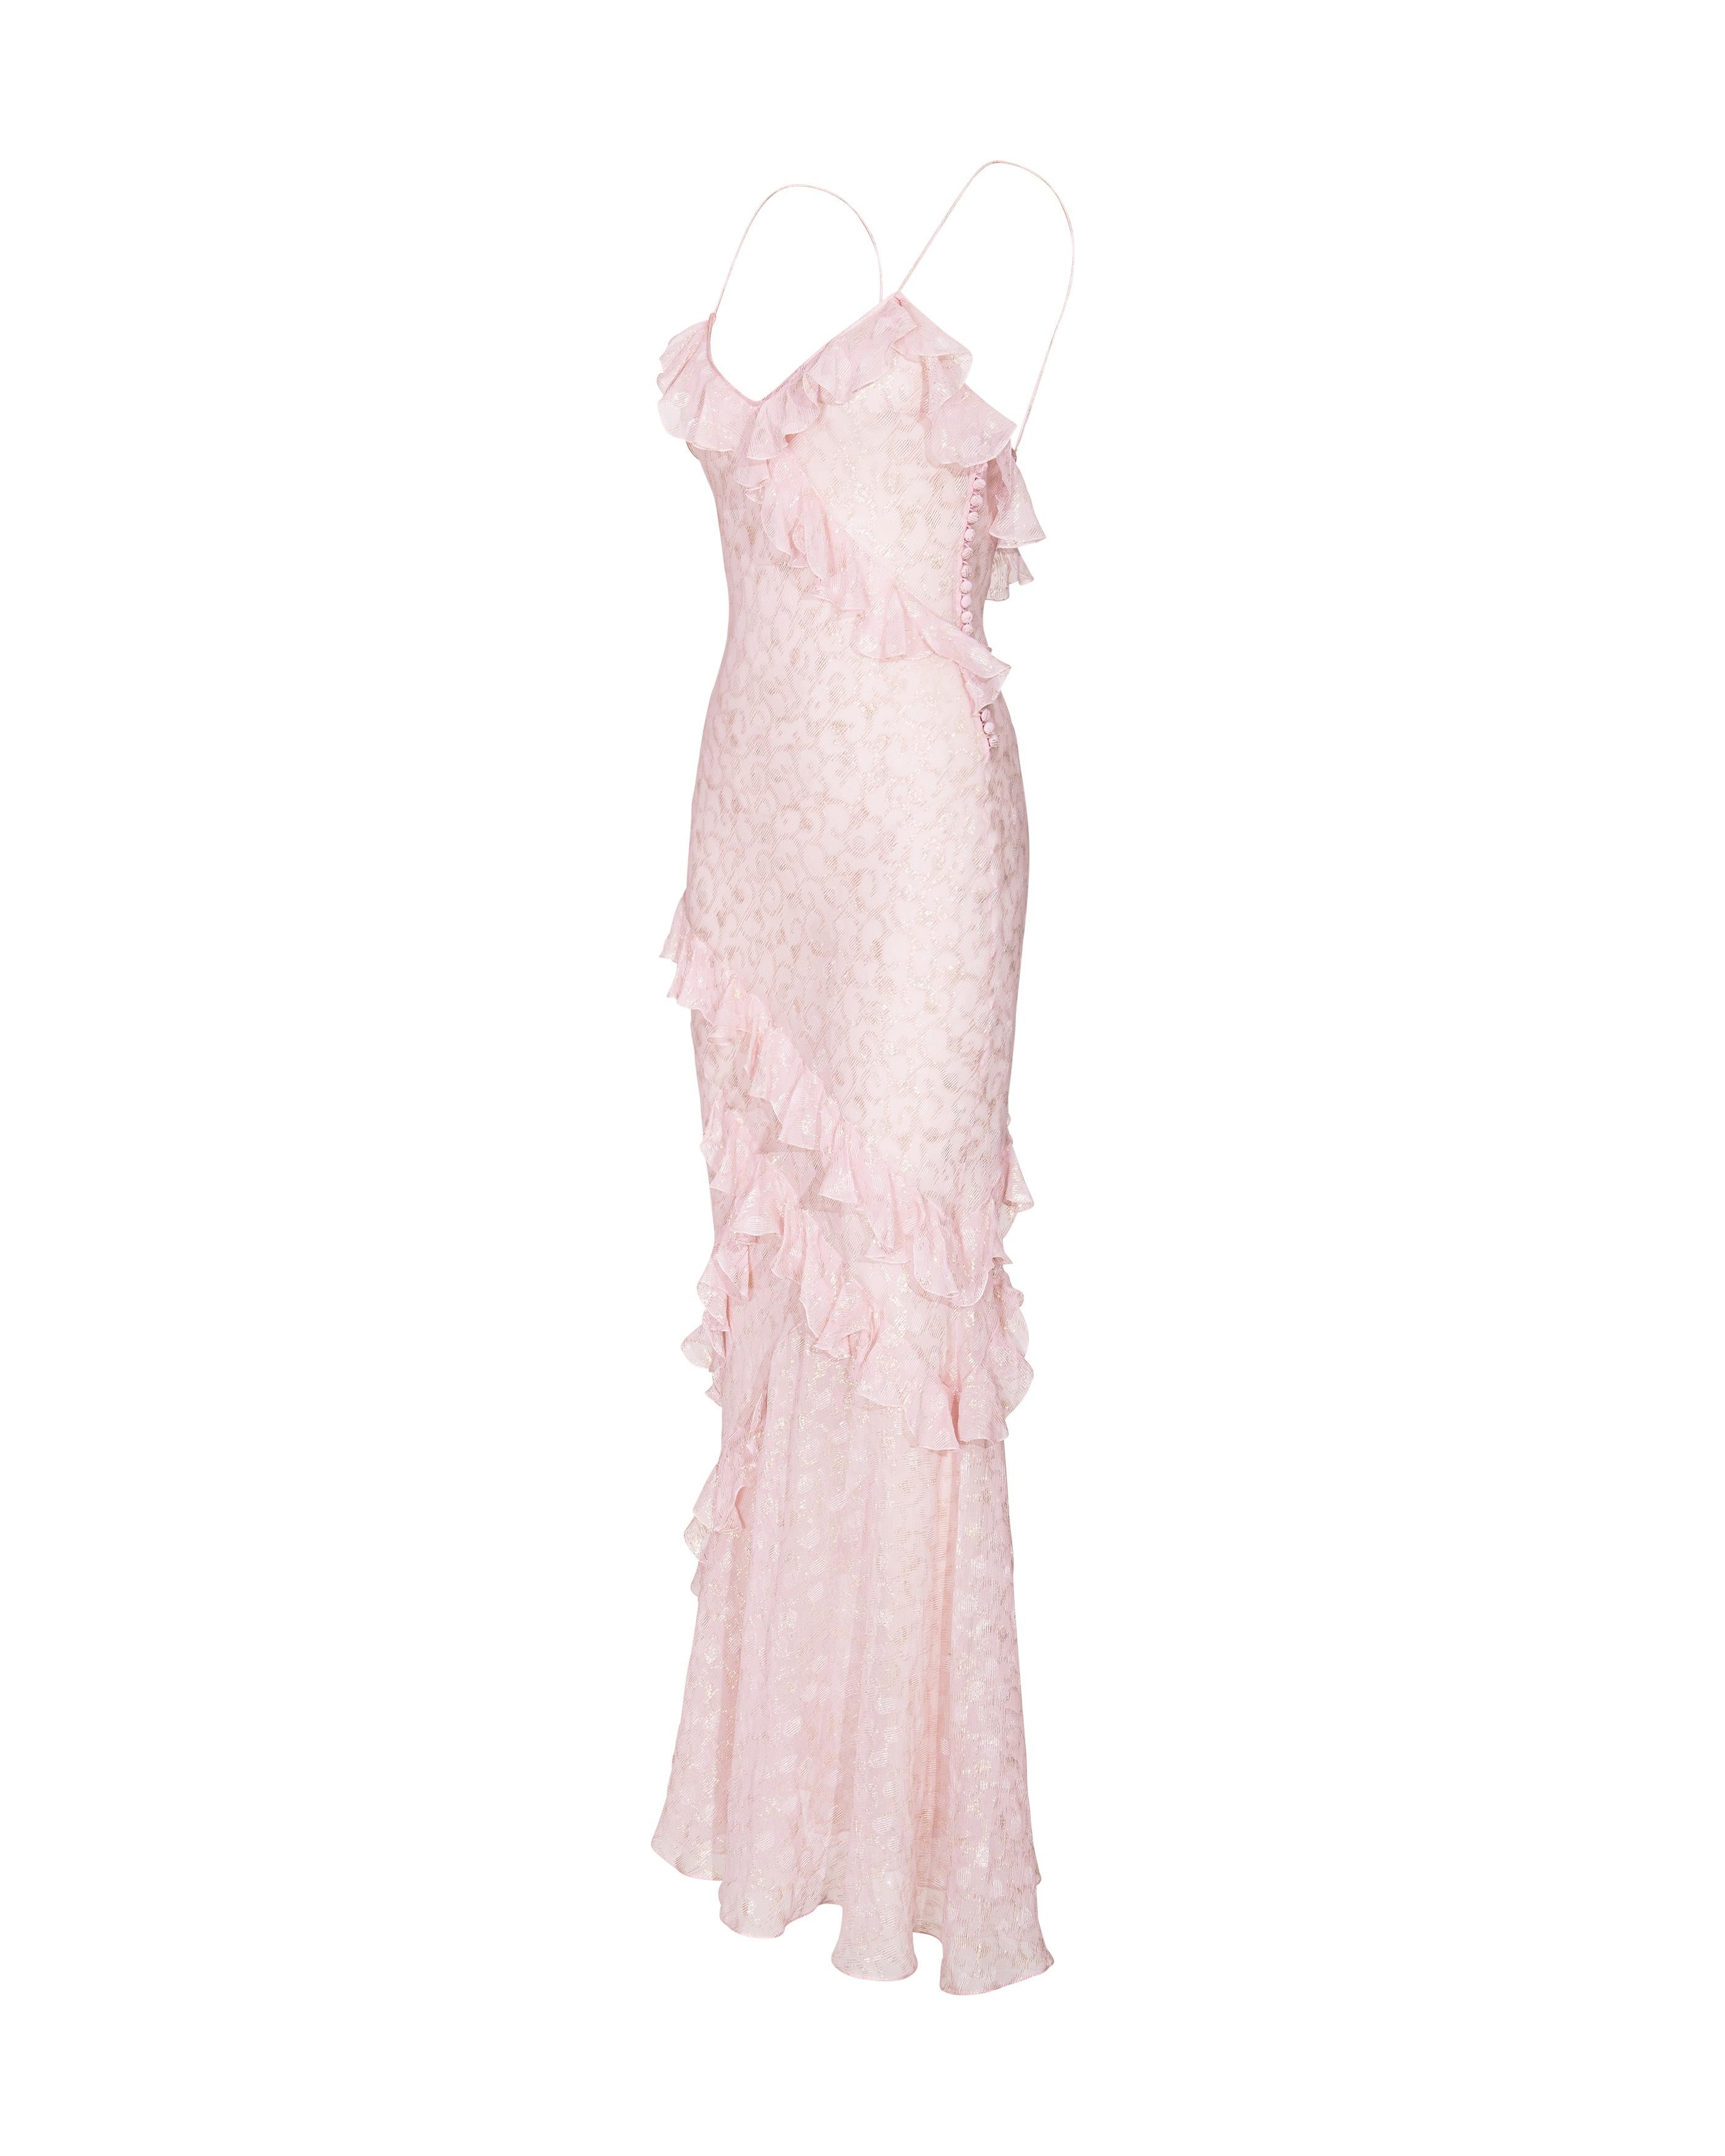 S/S 2004 Christian Dior by John Galliano Sheer Pink and Gold Ruffle Gown In Excellent Condition In North Hollywood, CA